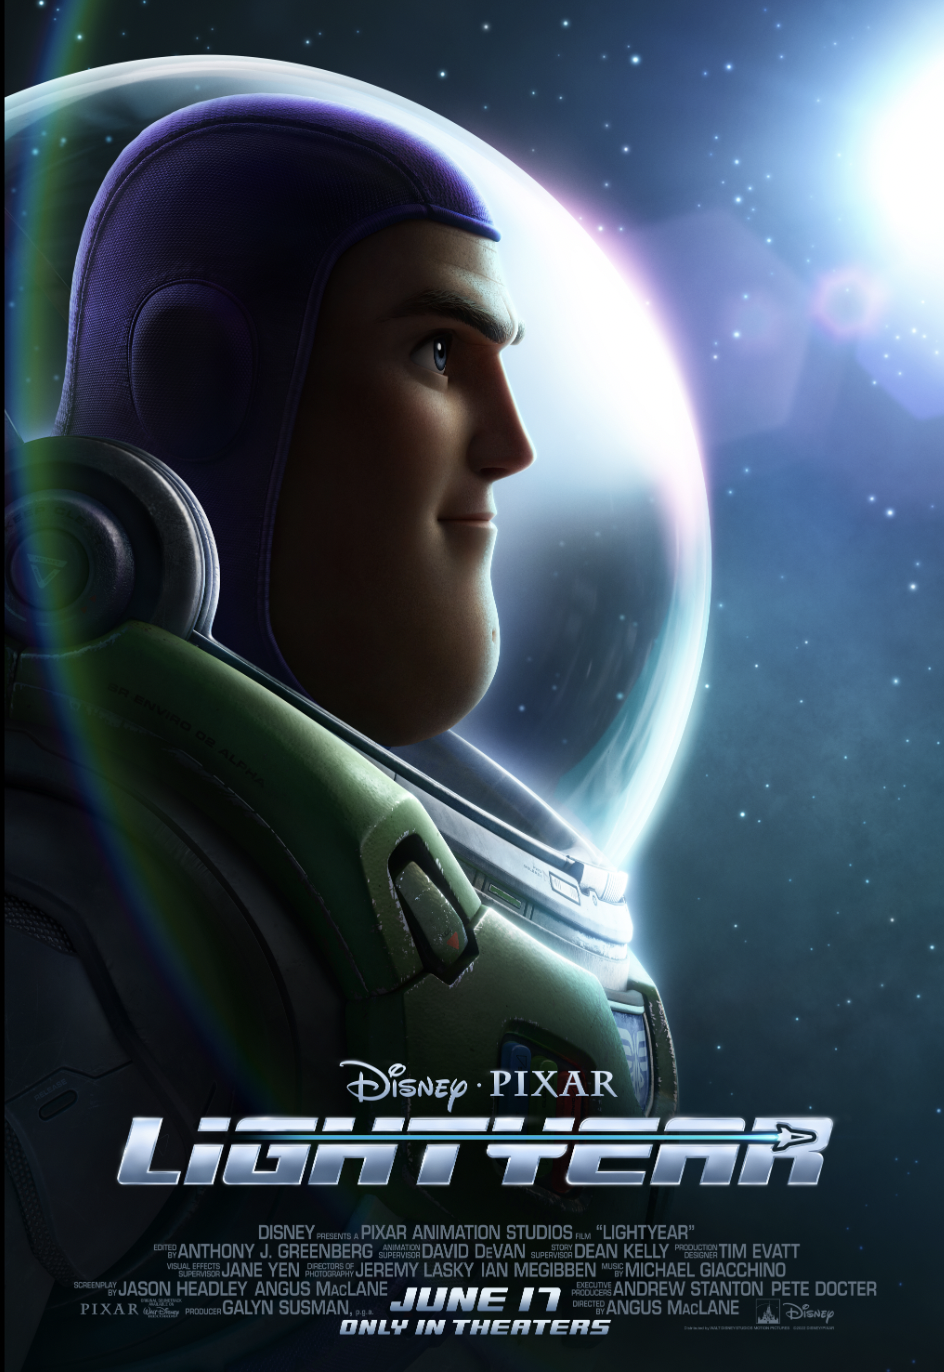 Lightyear images © Walt Disney Motion Pictures